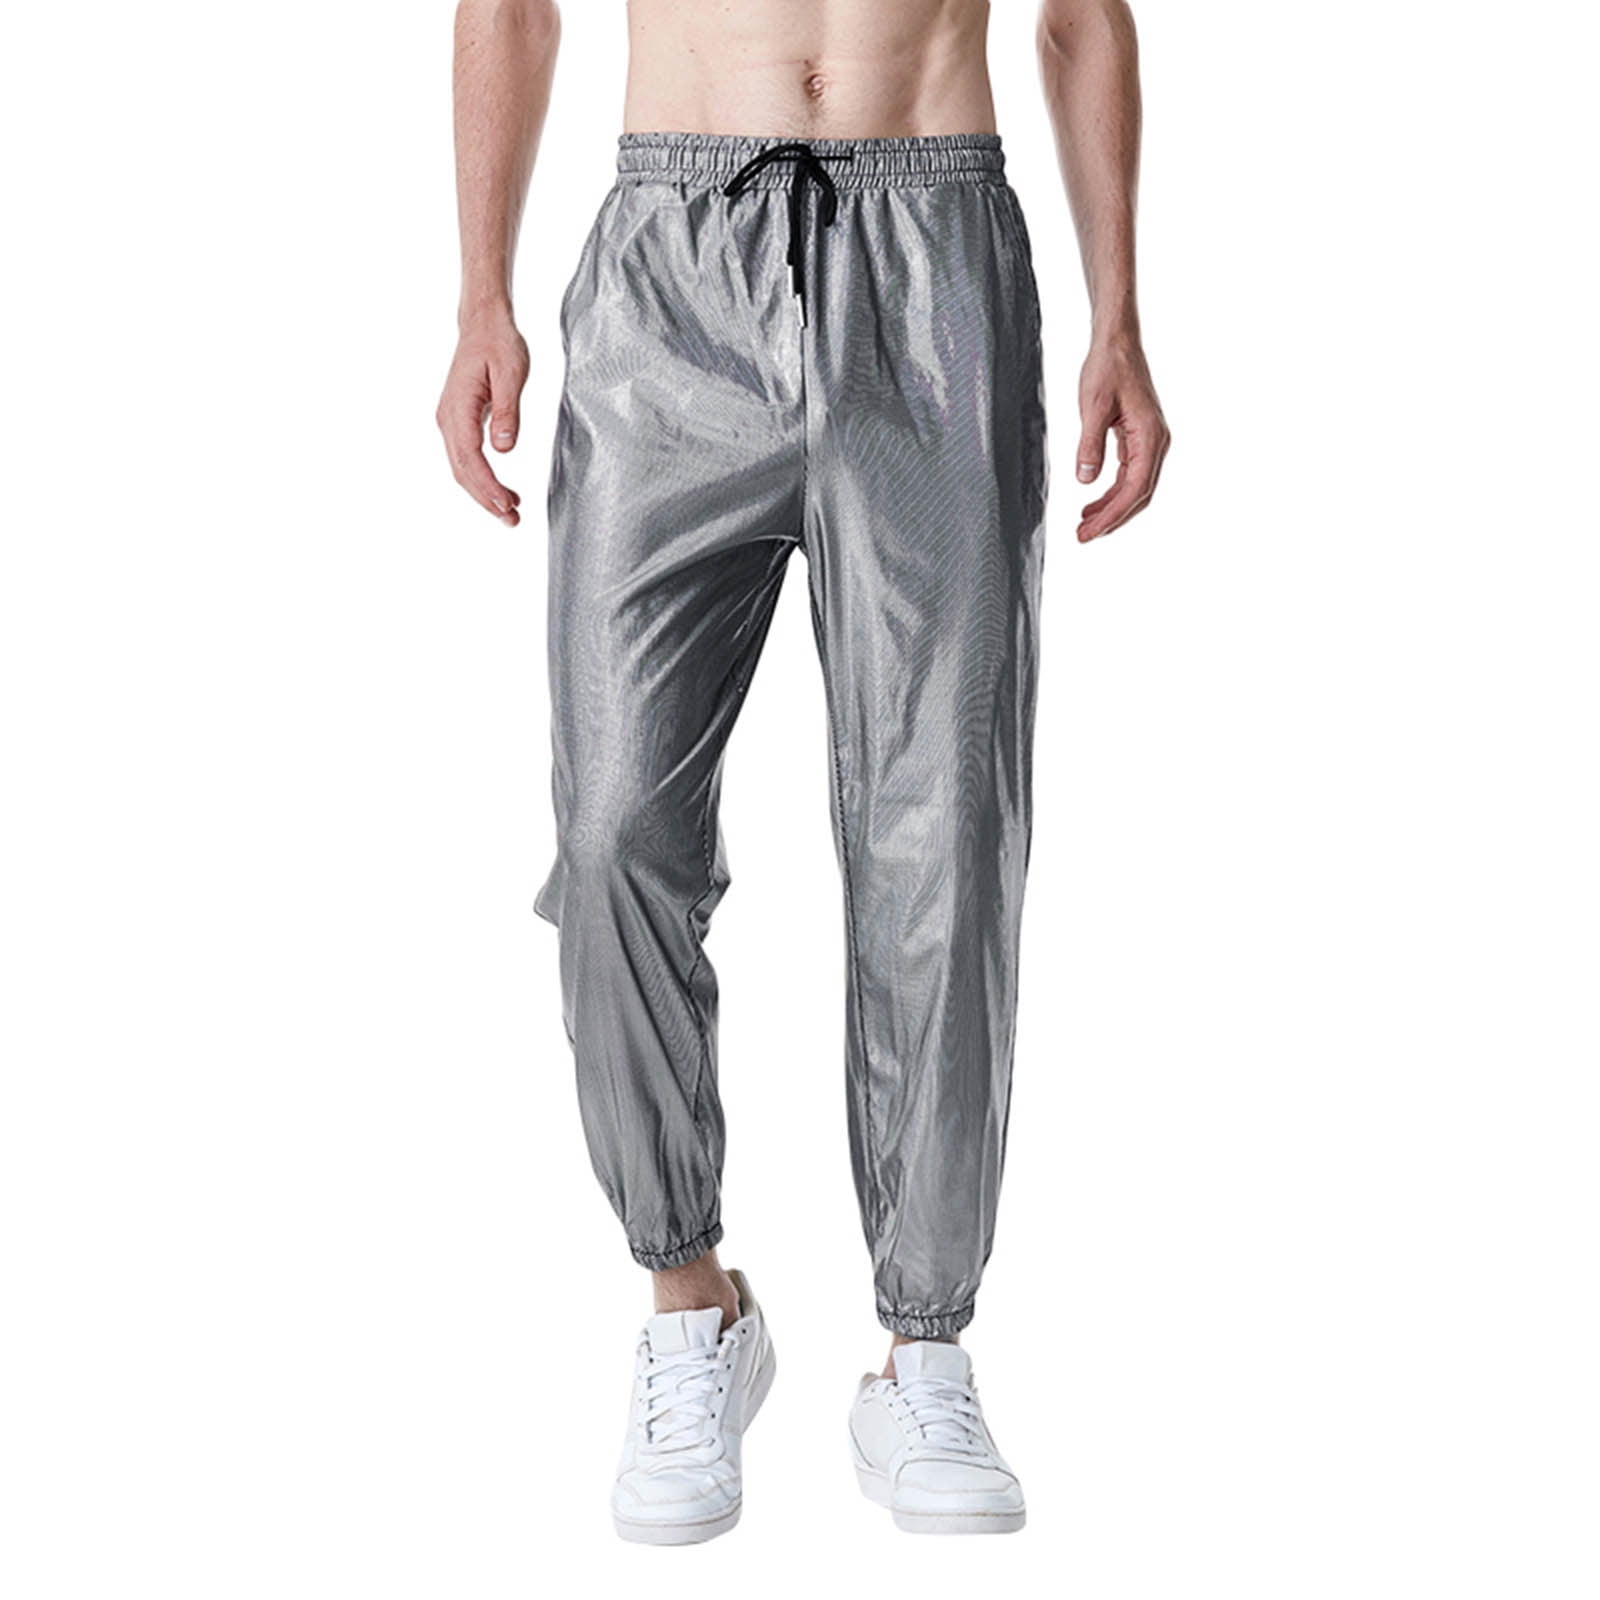 Buy C3 Coin Silver Coloured Classic Formal Trousers for Men. - FT_5717_ at  Amazon.in